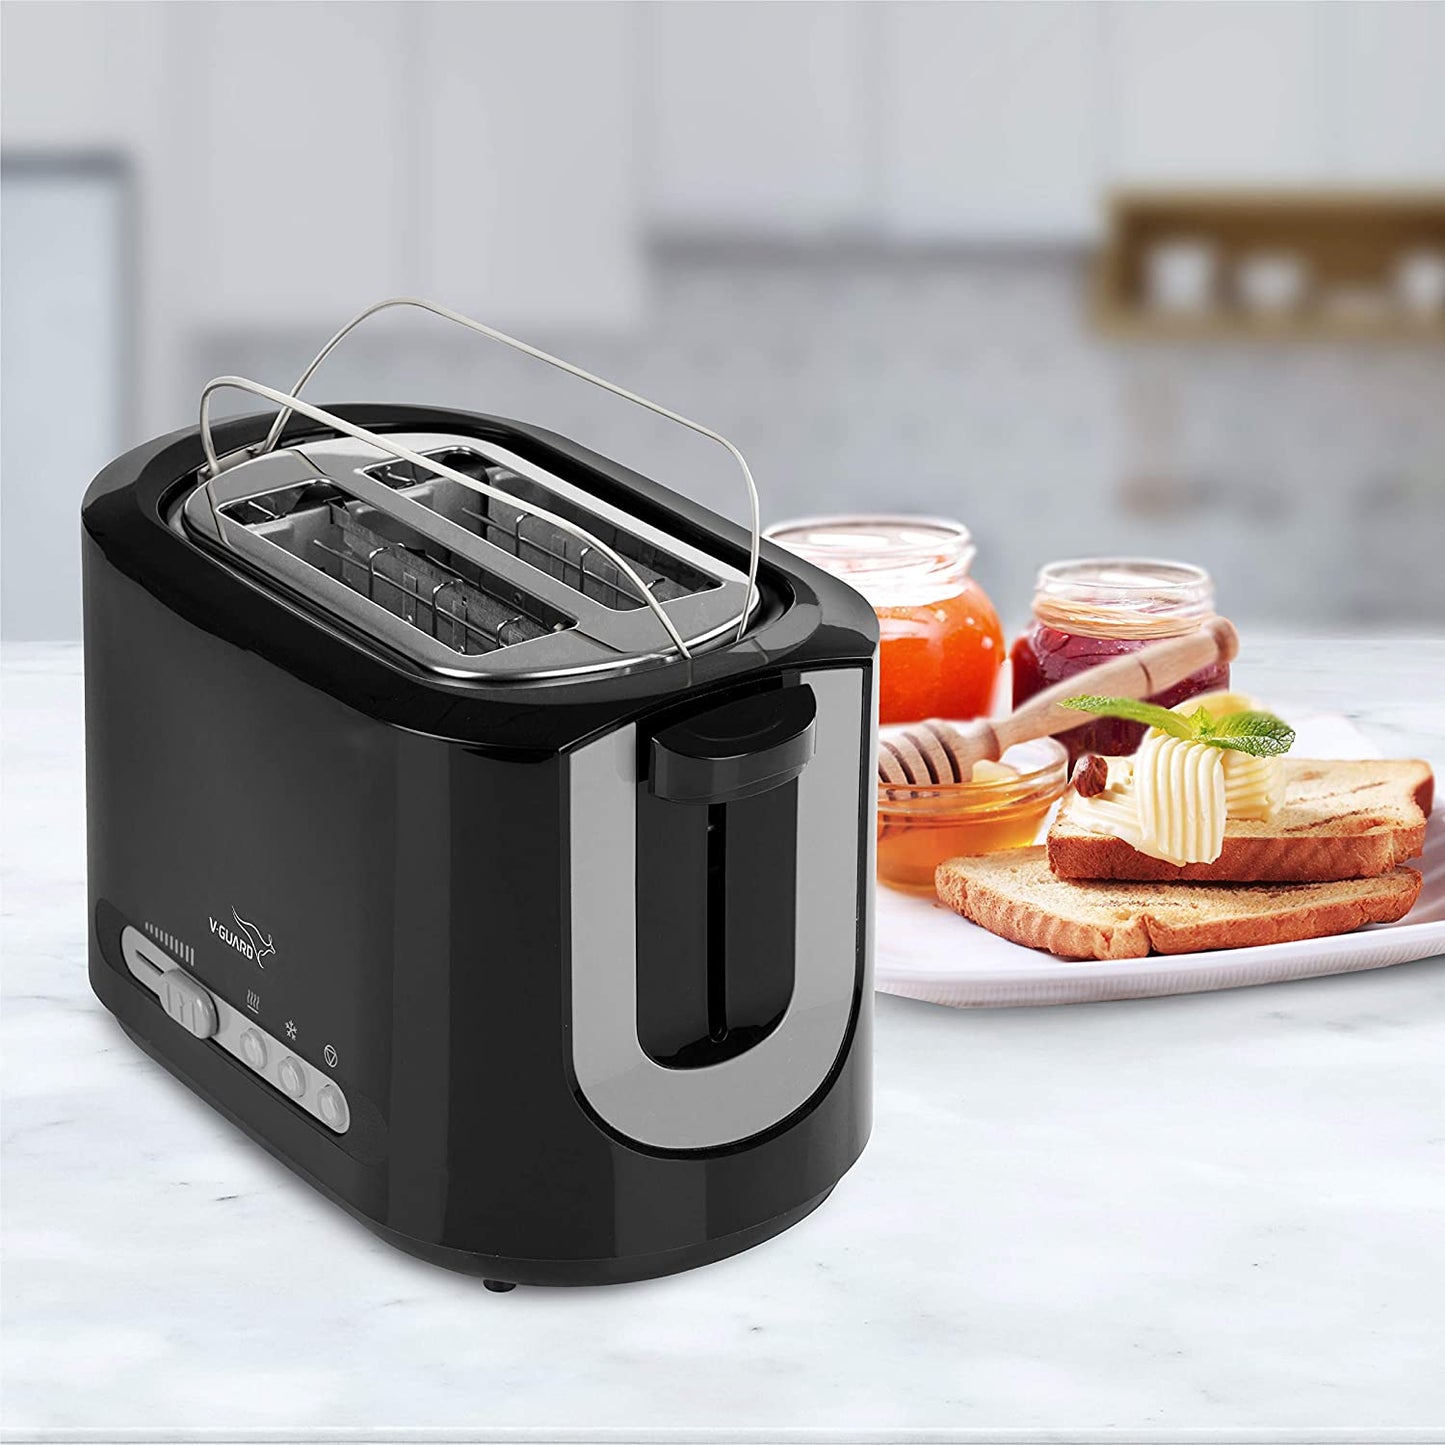 VT230 850 Watt 2-Slice Automatic Pop-Up Toaster with Bun Warmer, Variable Browning Levels and Defrost & Reheat Functions